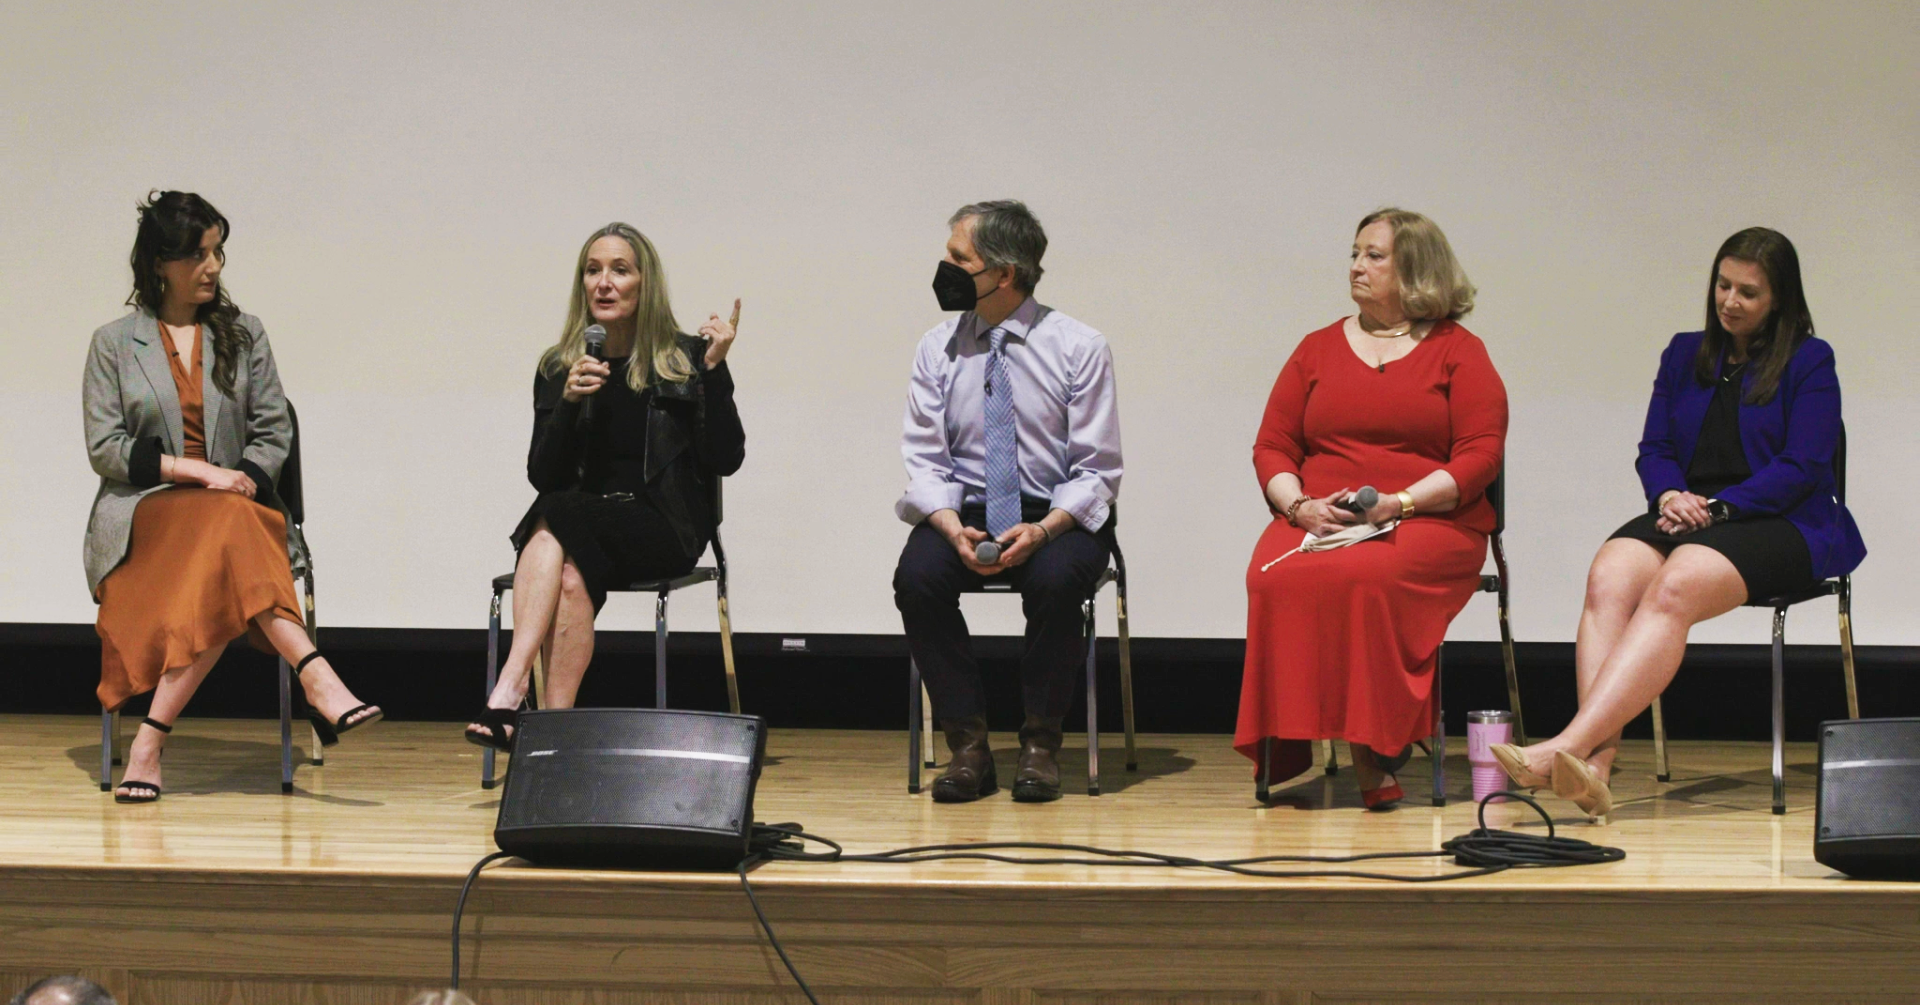 Community Screening &amp; Panel Discussion in Somerset, MA